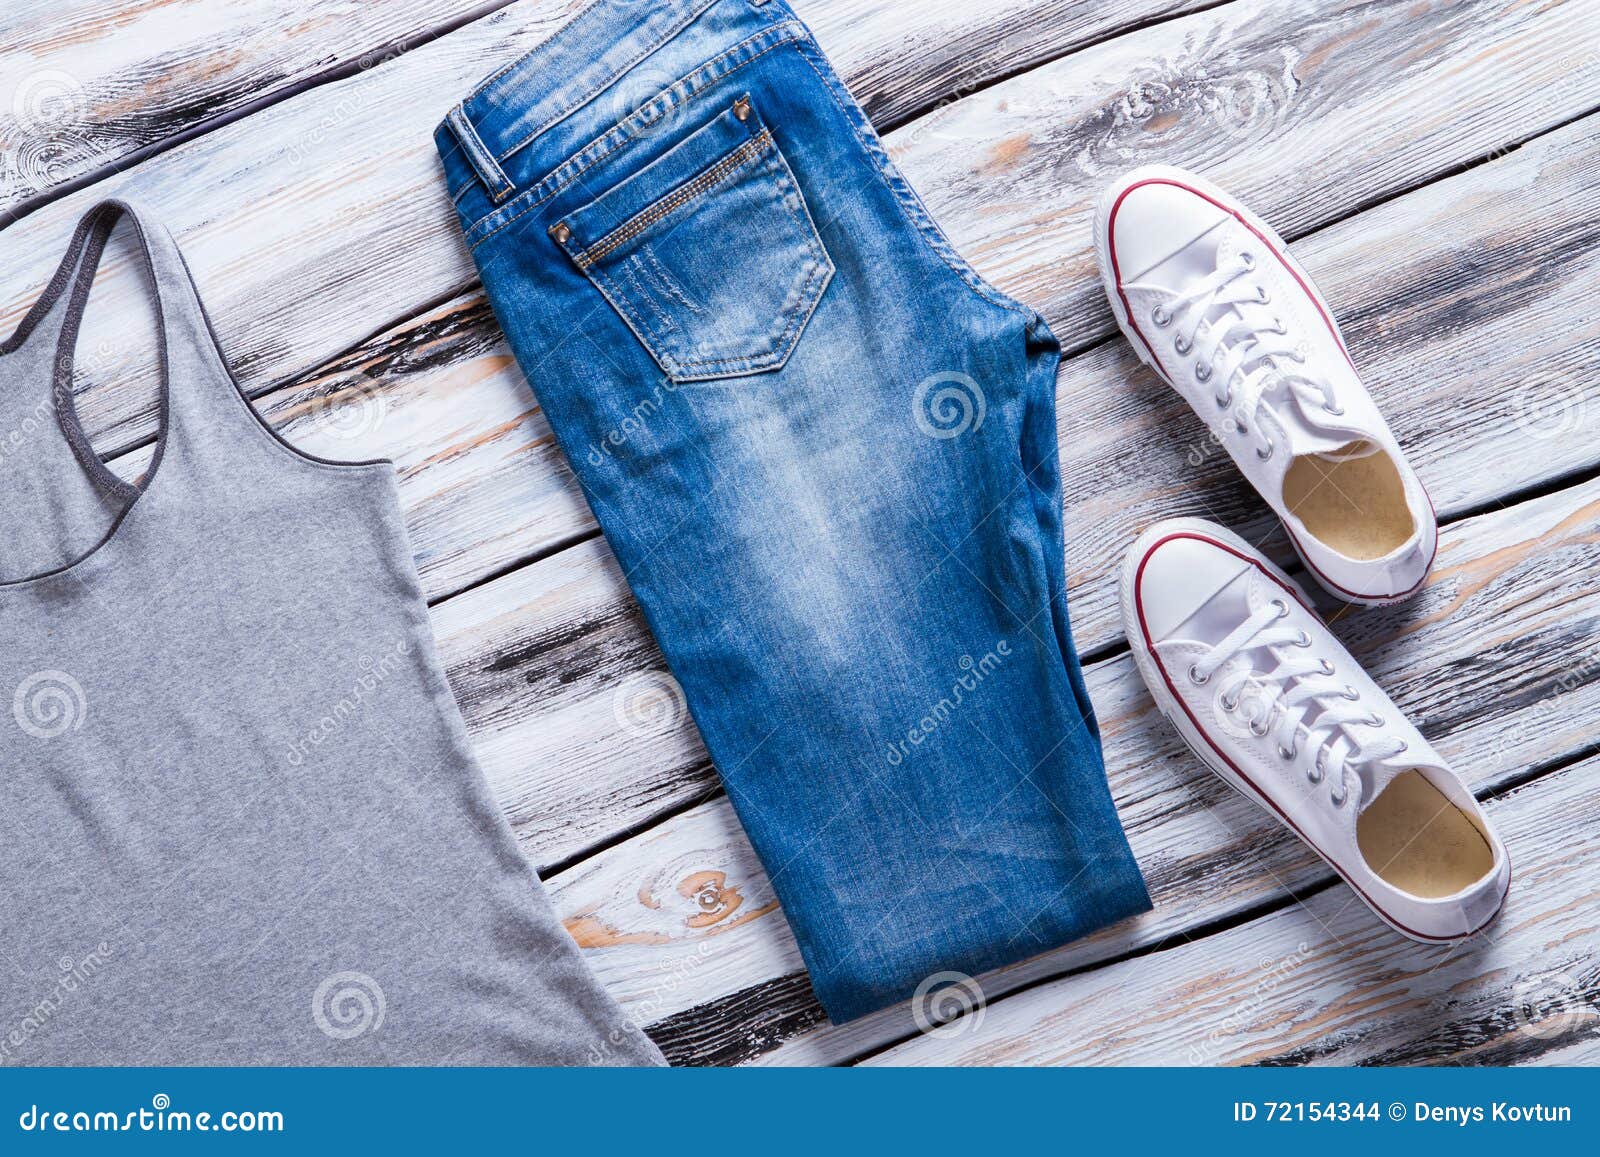 Jeans and gray tank top. stock photo. Image of item, fashion - 72154344